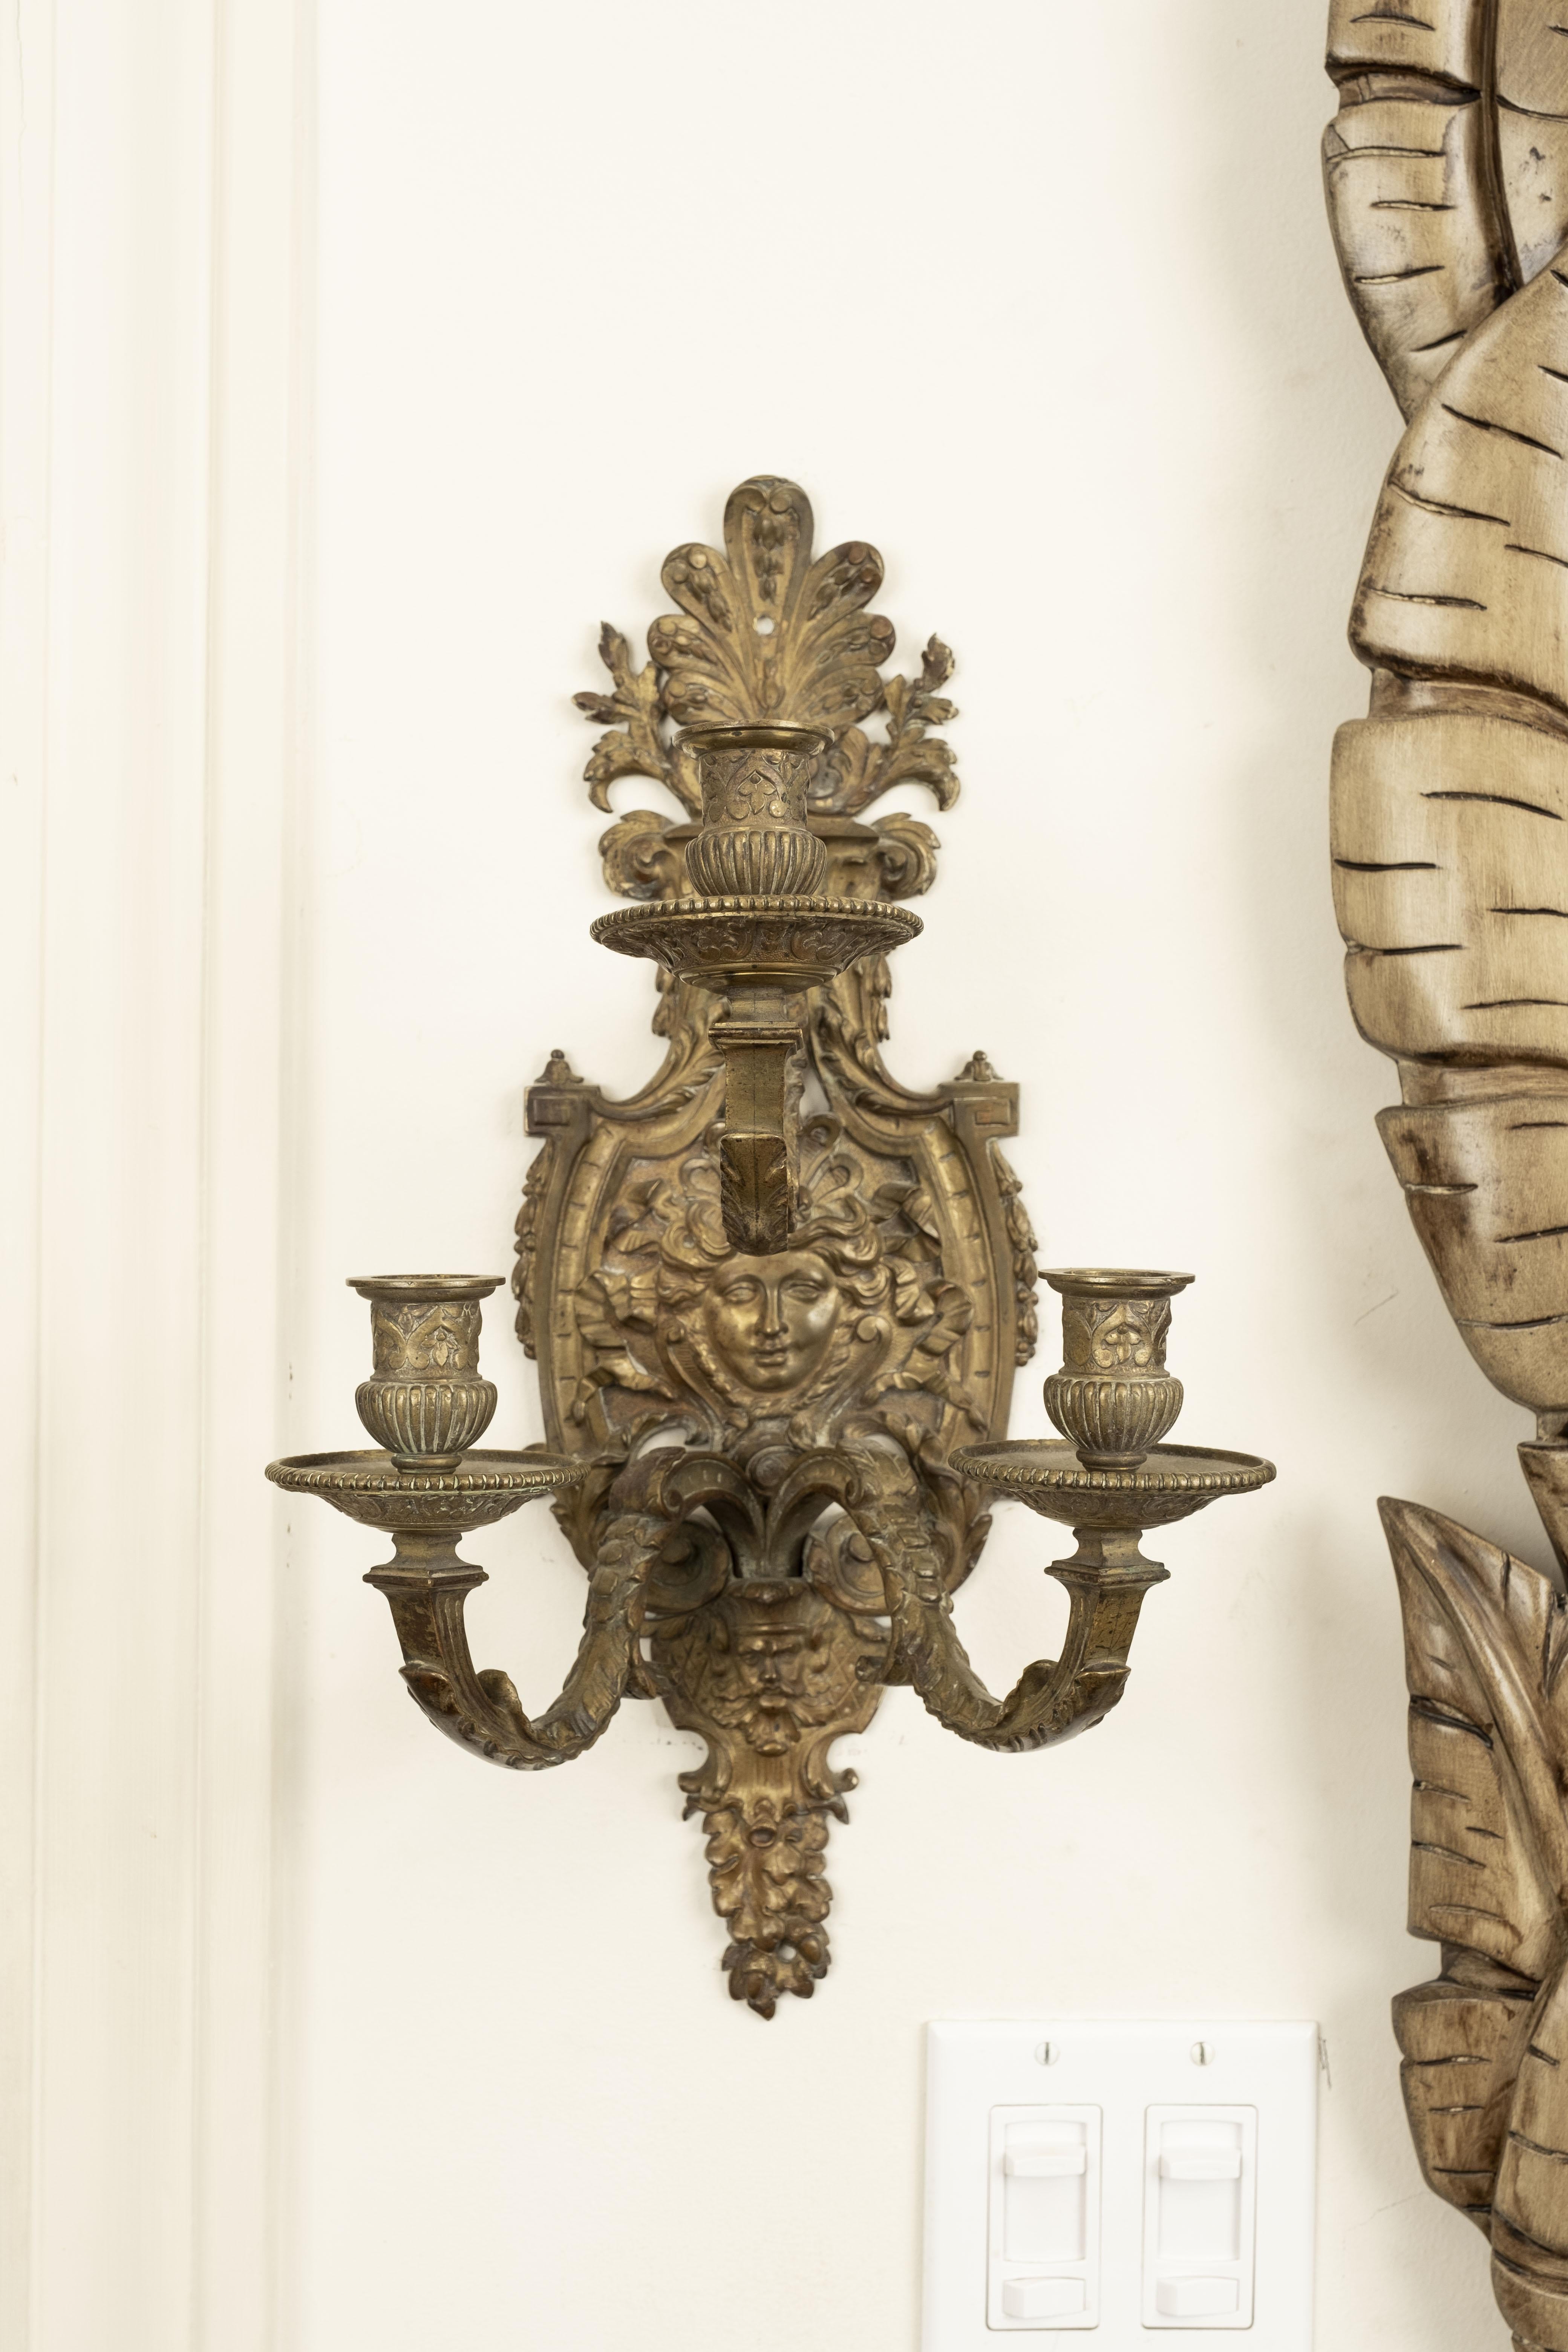 Pair of French Louis XIV style bronze sconces. These beautiful French bronze 3 light sconces are currently unwired. Could be used with candles or easily wired if desired. Great patina!